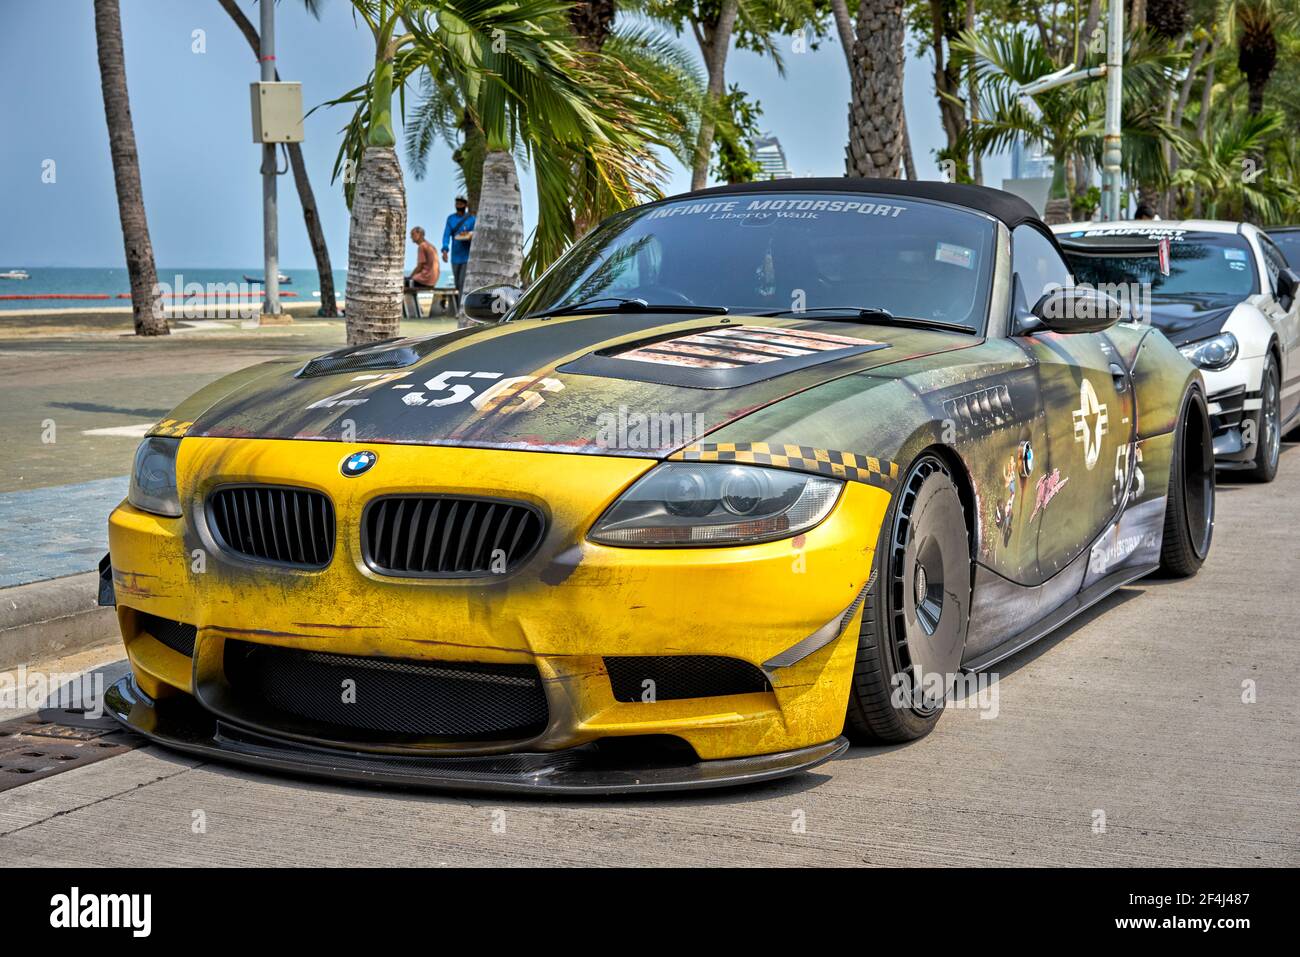 BMW Z convertible customised with an unusual distressed look Stock Photo